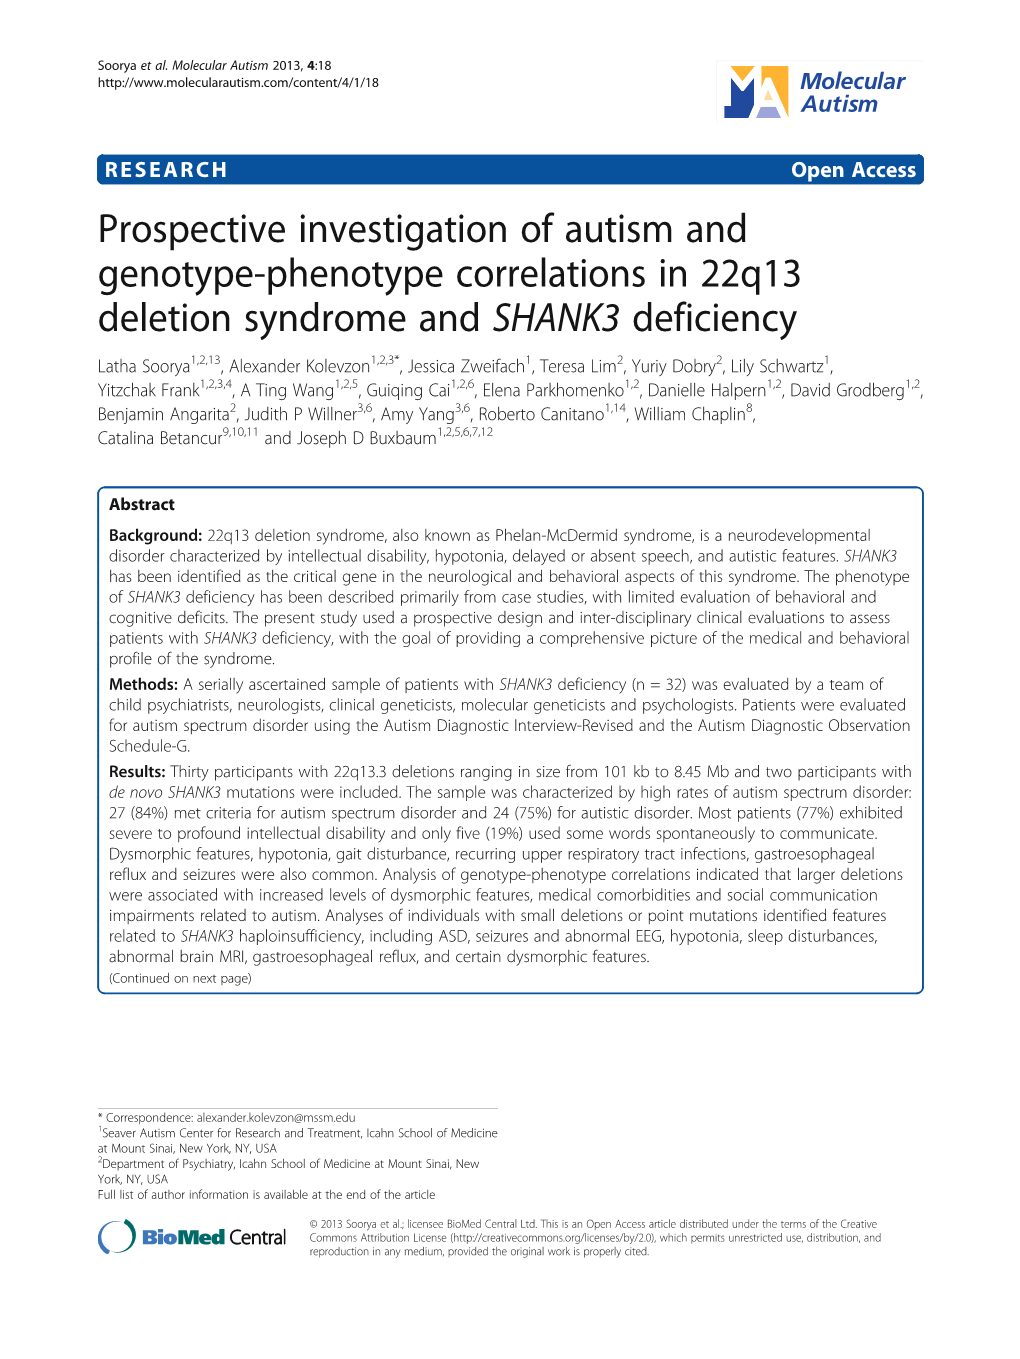 Prospective Investigation of Autism and Genotype